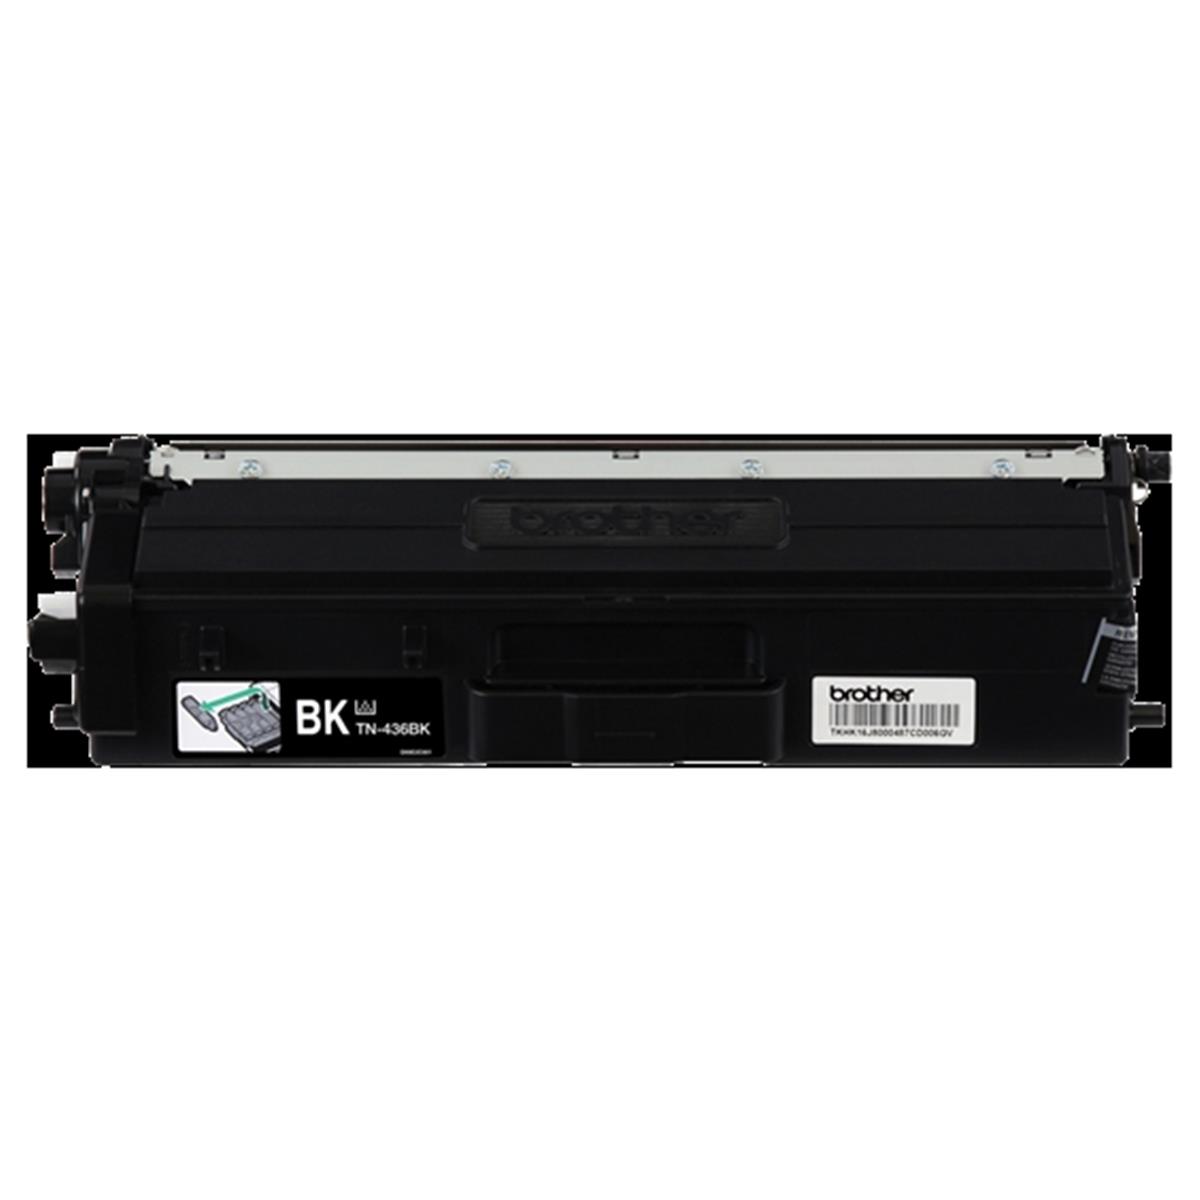 Picture of Aster Graphics AC-B0436K TN-436BK Brother Compatible Toner Cartridge - Black